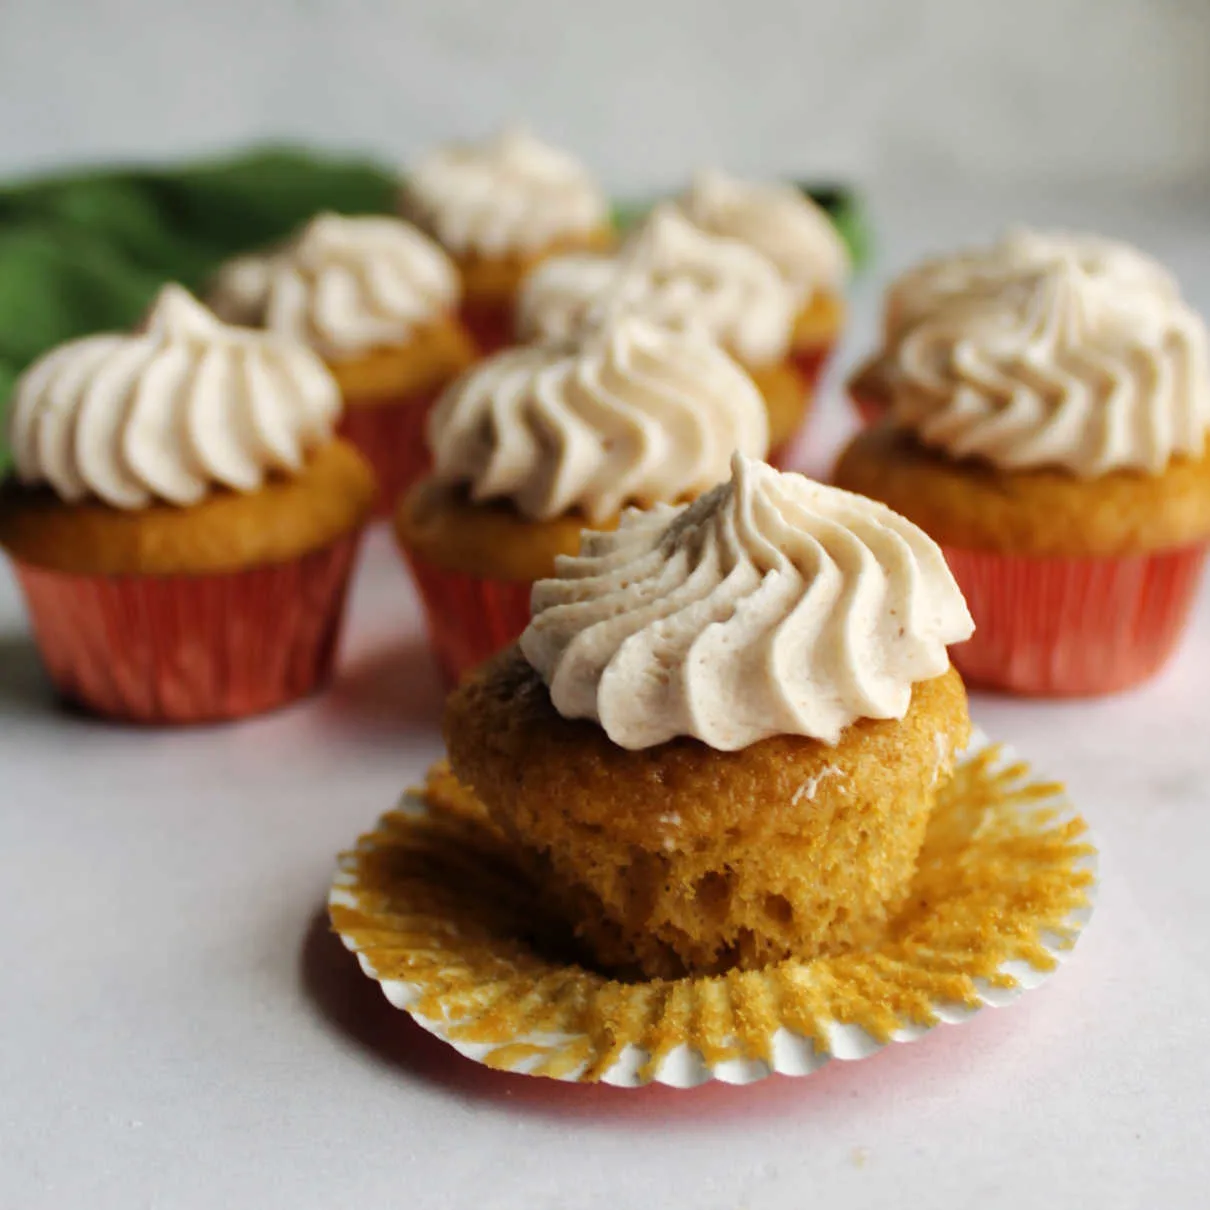 Apple butter mini cupcake unwrapped showing soft cake bottom topped with swirl of apple butter frosting.